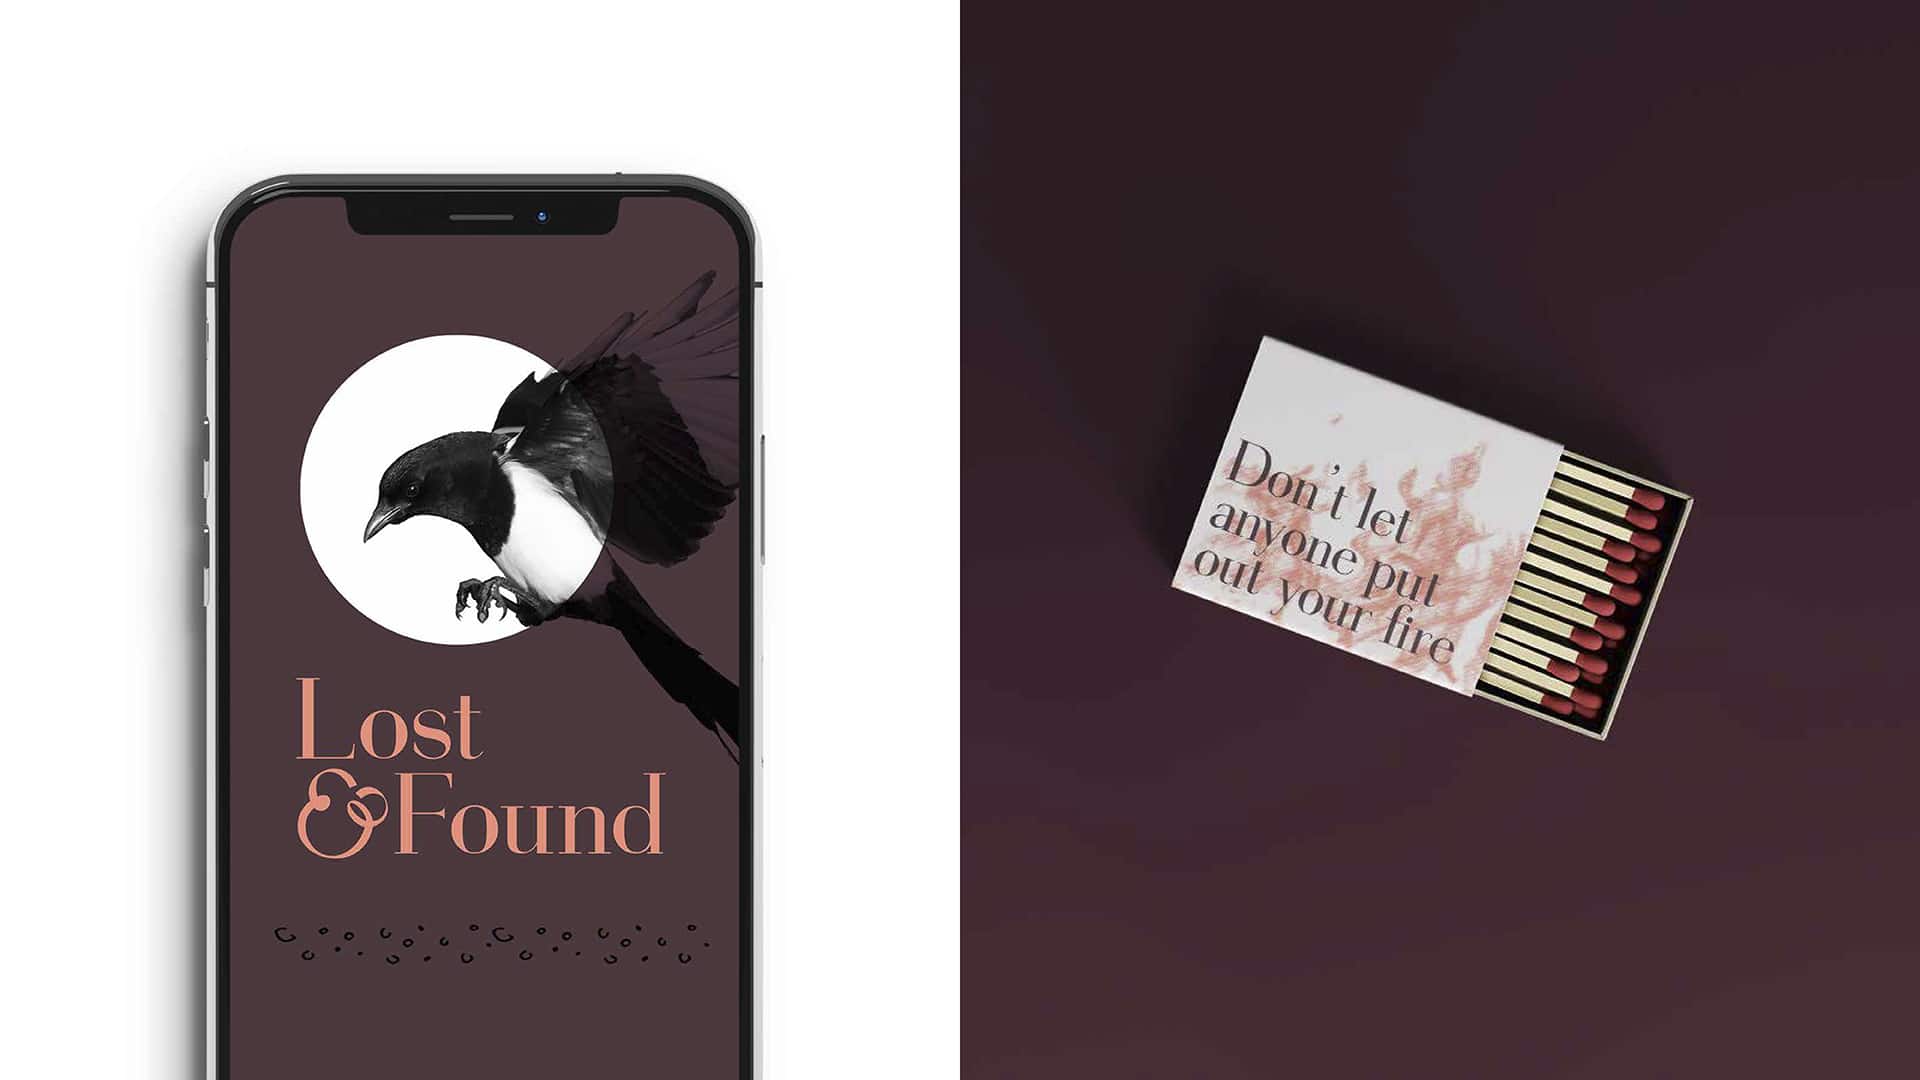 An image of a mobile website design for a brand called Lost and Found. The design shows a magpie flying across the moon